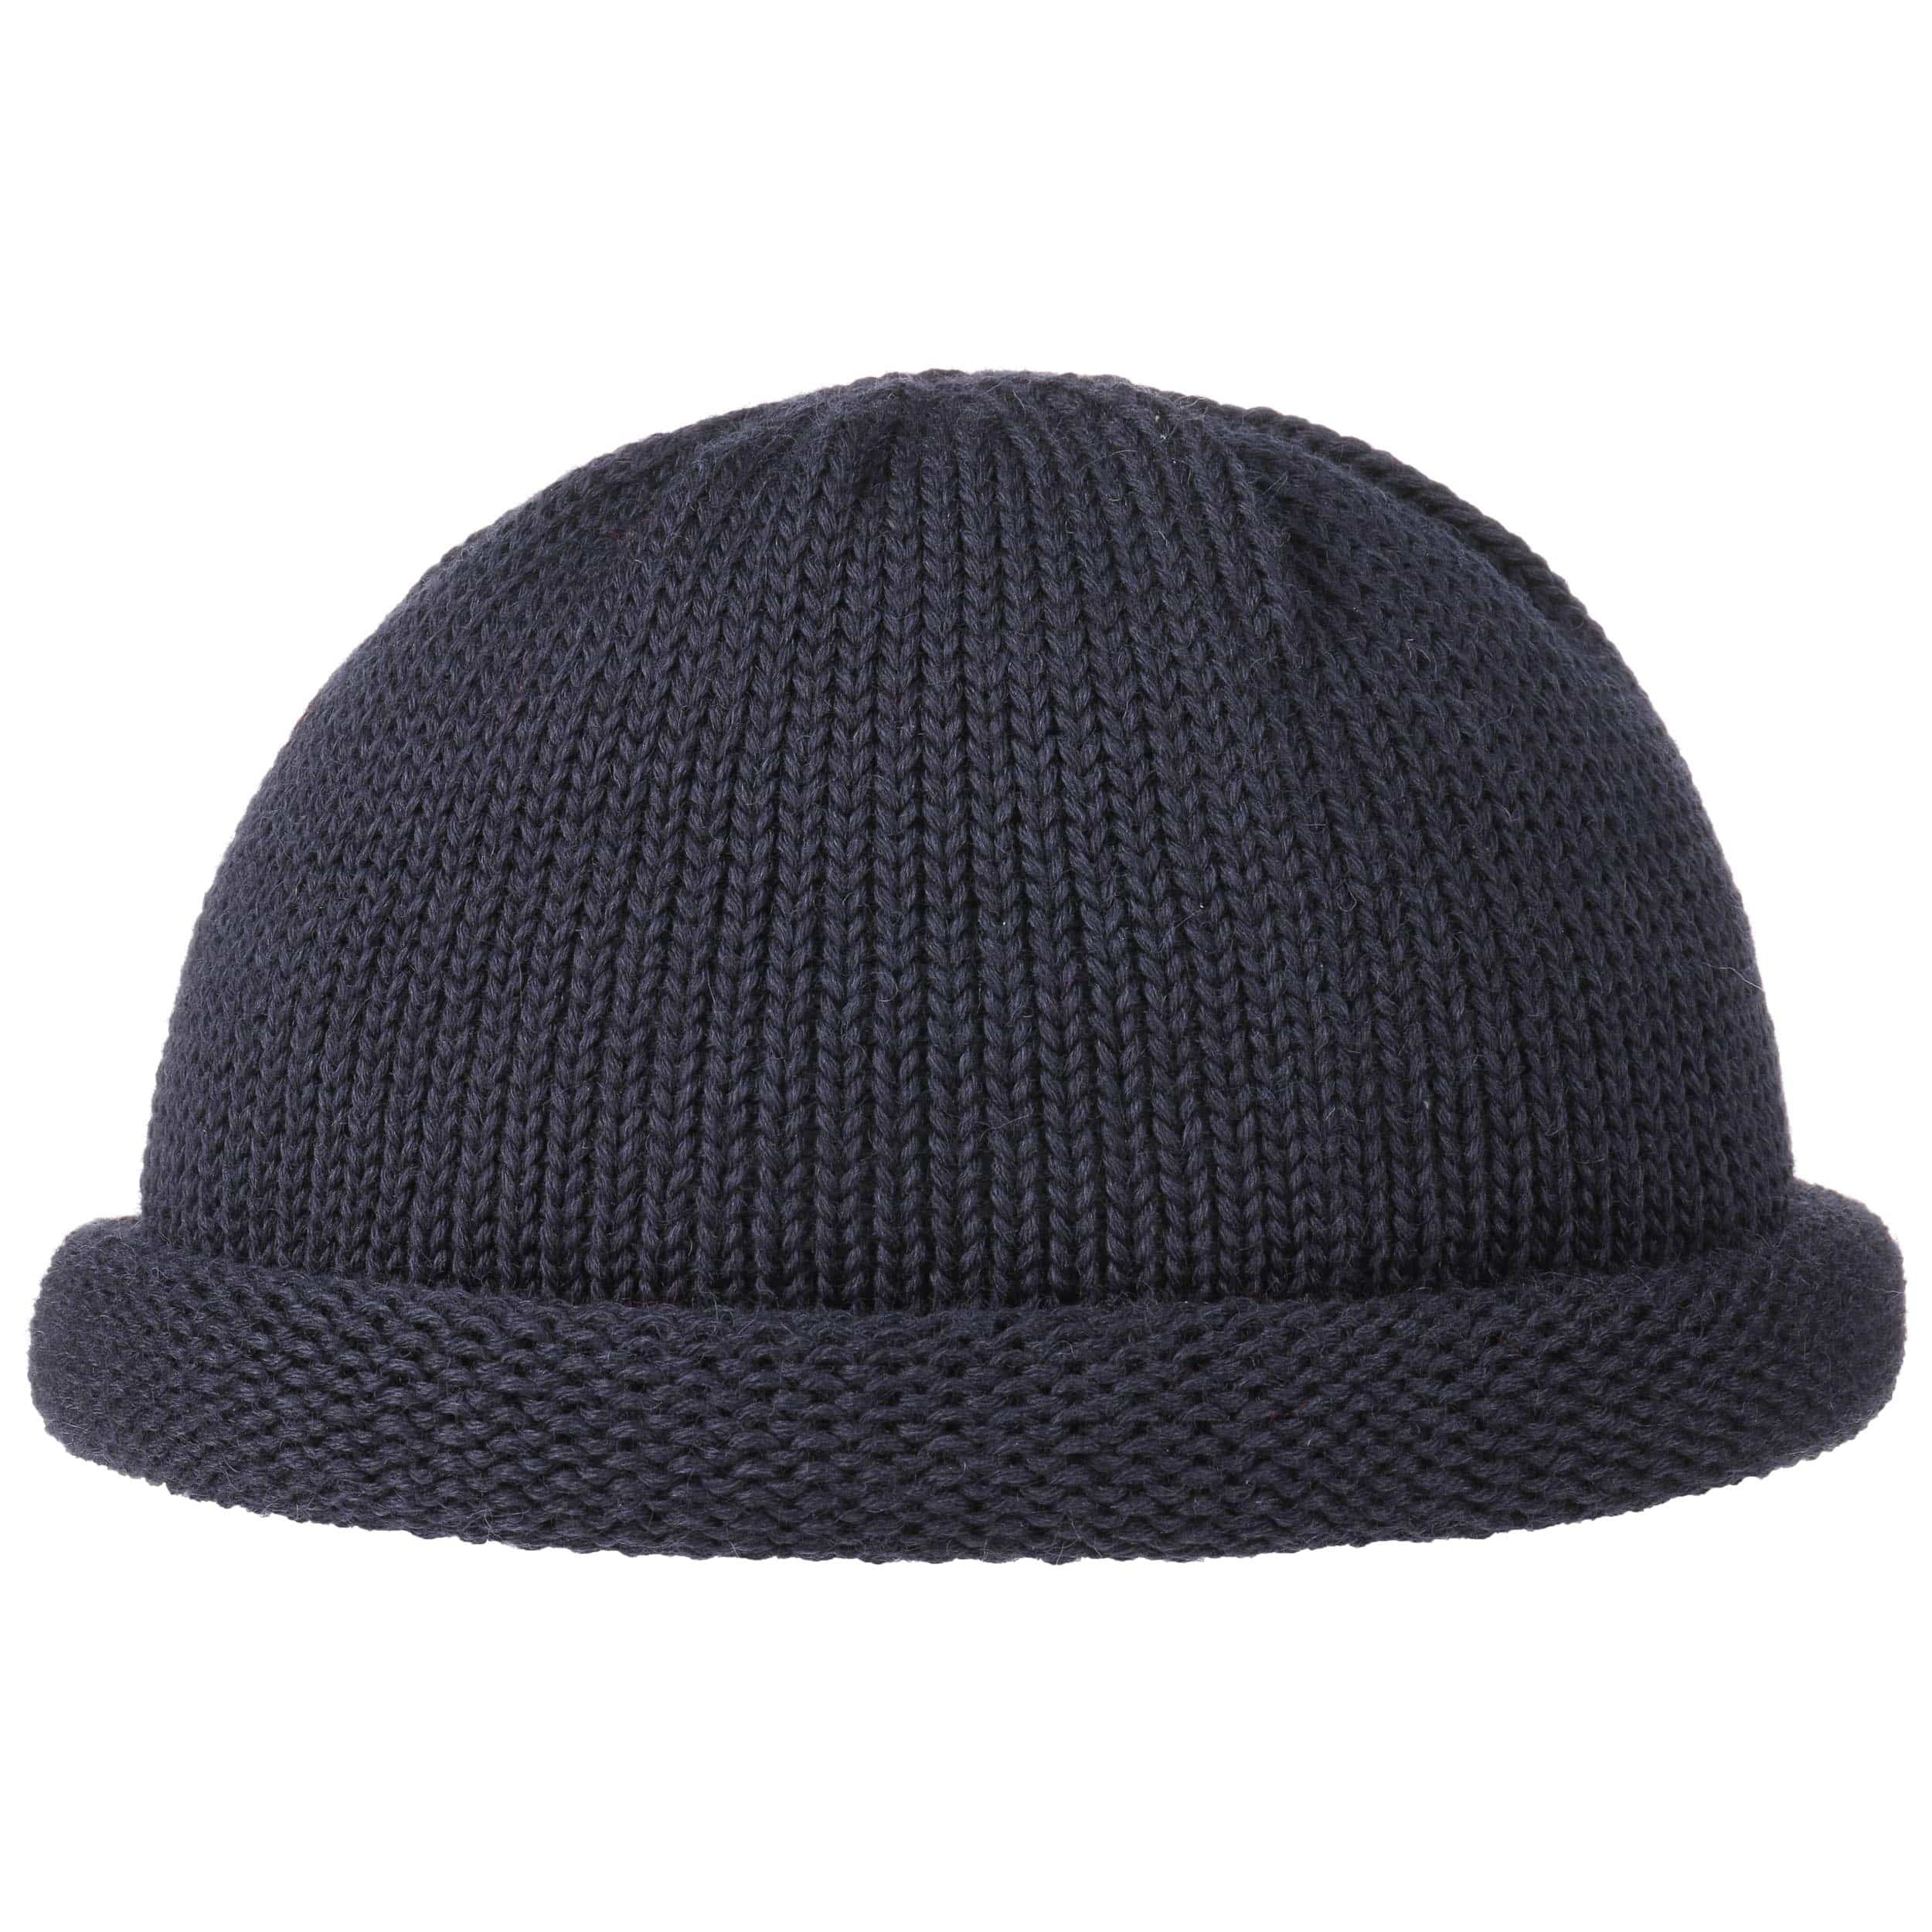 Rolled Edge Knit Hat by Lierys, GBP 22,95 --> Hats, caps & beanies shop ...